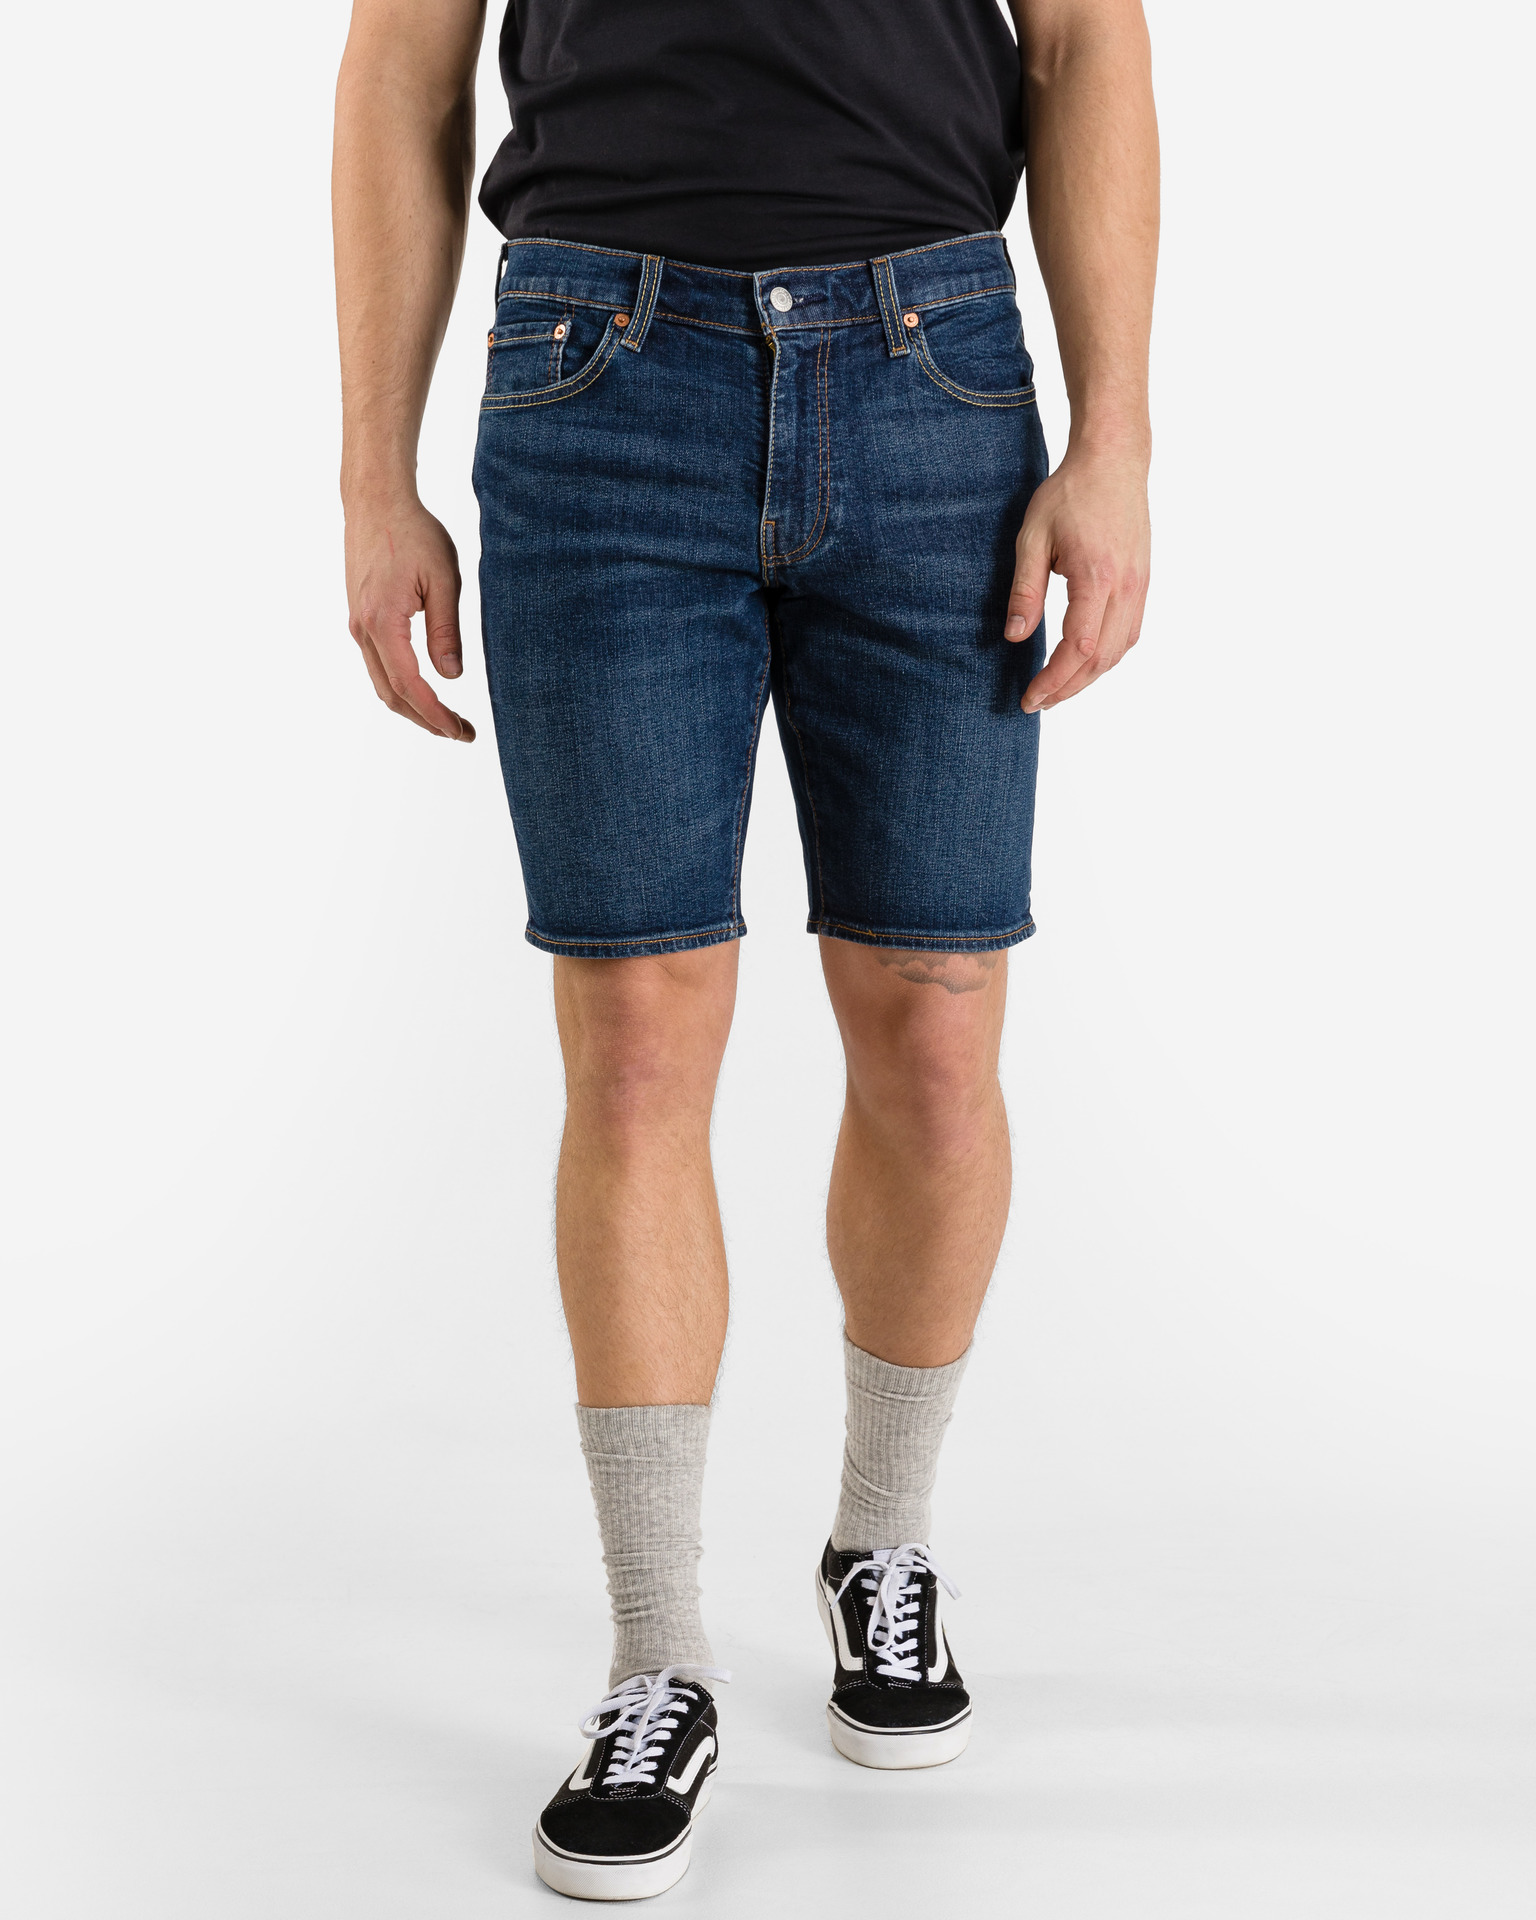 Pants, Shorts, Denim : State Bicycle Co. Clothing | State Bicycle Co.